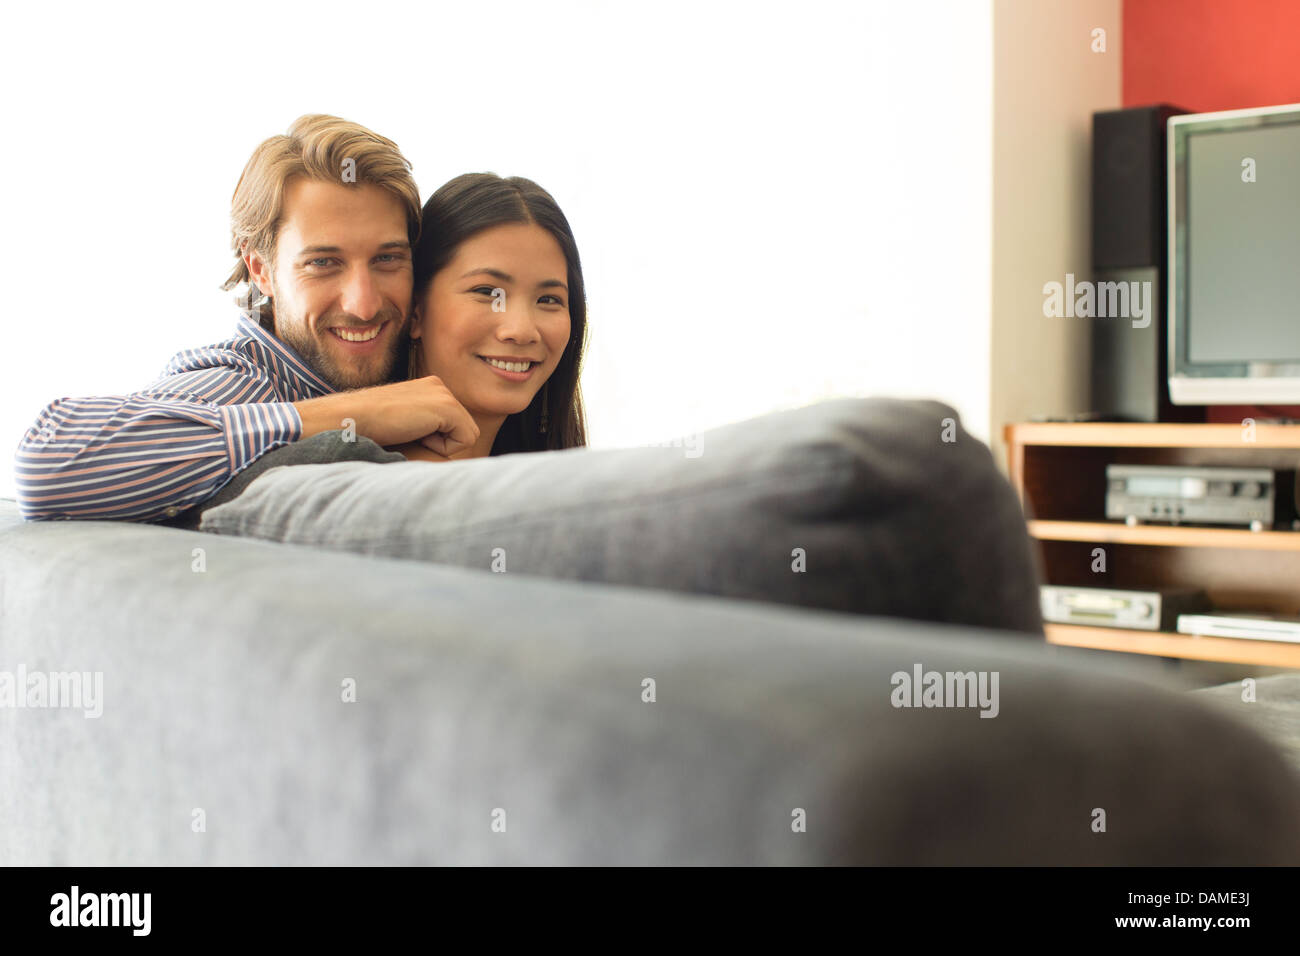 Couple relaxing together on sofa Stock Photo